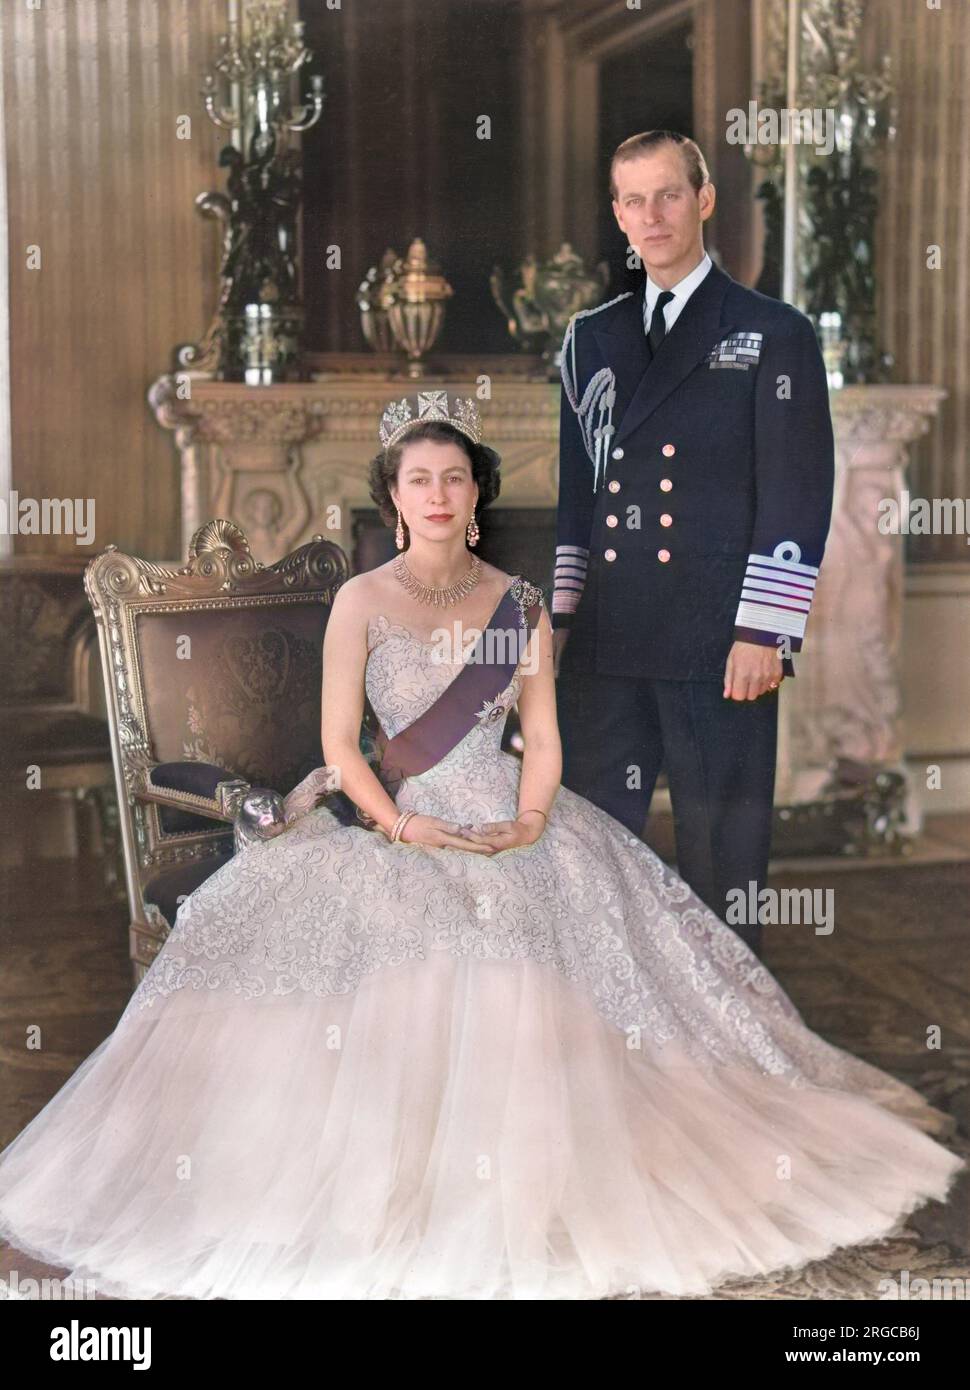 Queen Elizabeth II and Prince Philip, Duke of Edinburgh pictured together in the Grand Entrance in Buckingham Palace in 1954.  The Queen is wearing a yellow tulle evening gown decorated with sprays of mimosa and gold pailette embroidery and is wearing the blue Ribbon and Star of the Garter.  Her necklace was a wedding present from the Nizam of Hyderabad; the tiara also a wedding present from Queen Mary.  The bow brooch and drop earrings are set with diamonds.  The Duke is wearing the uniform of the Admiral of the Fleet. Stock Photo